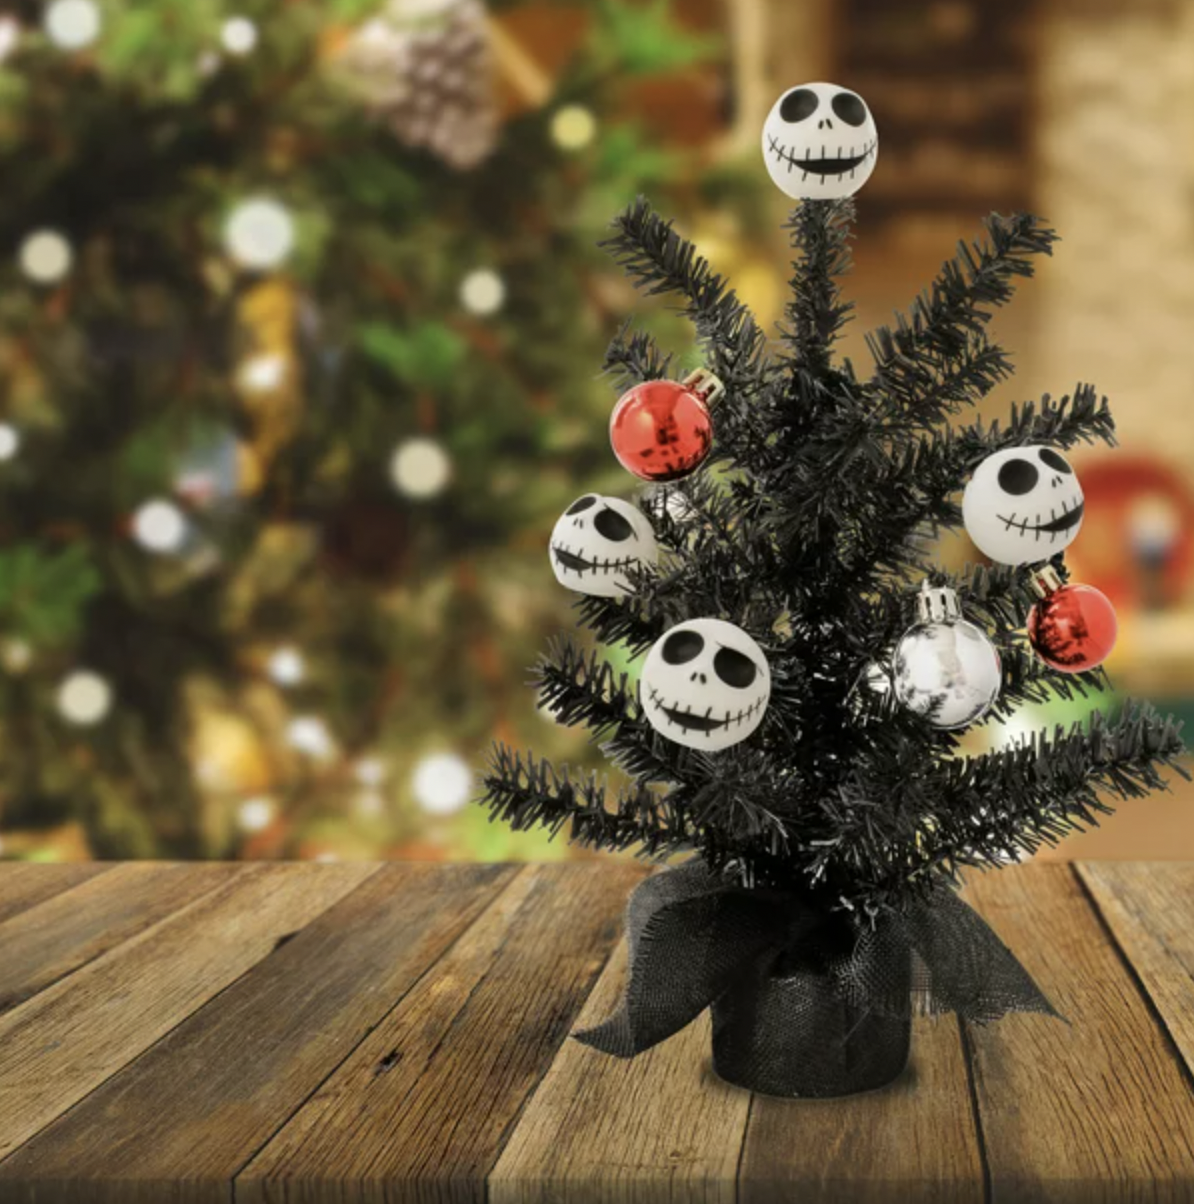 The Best Nightmare Before Christmas Tree 2022: Shop Our Top Picks